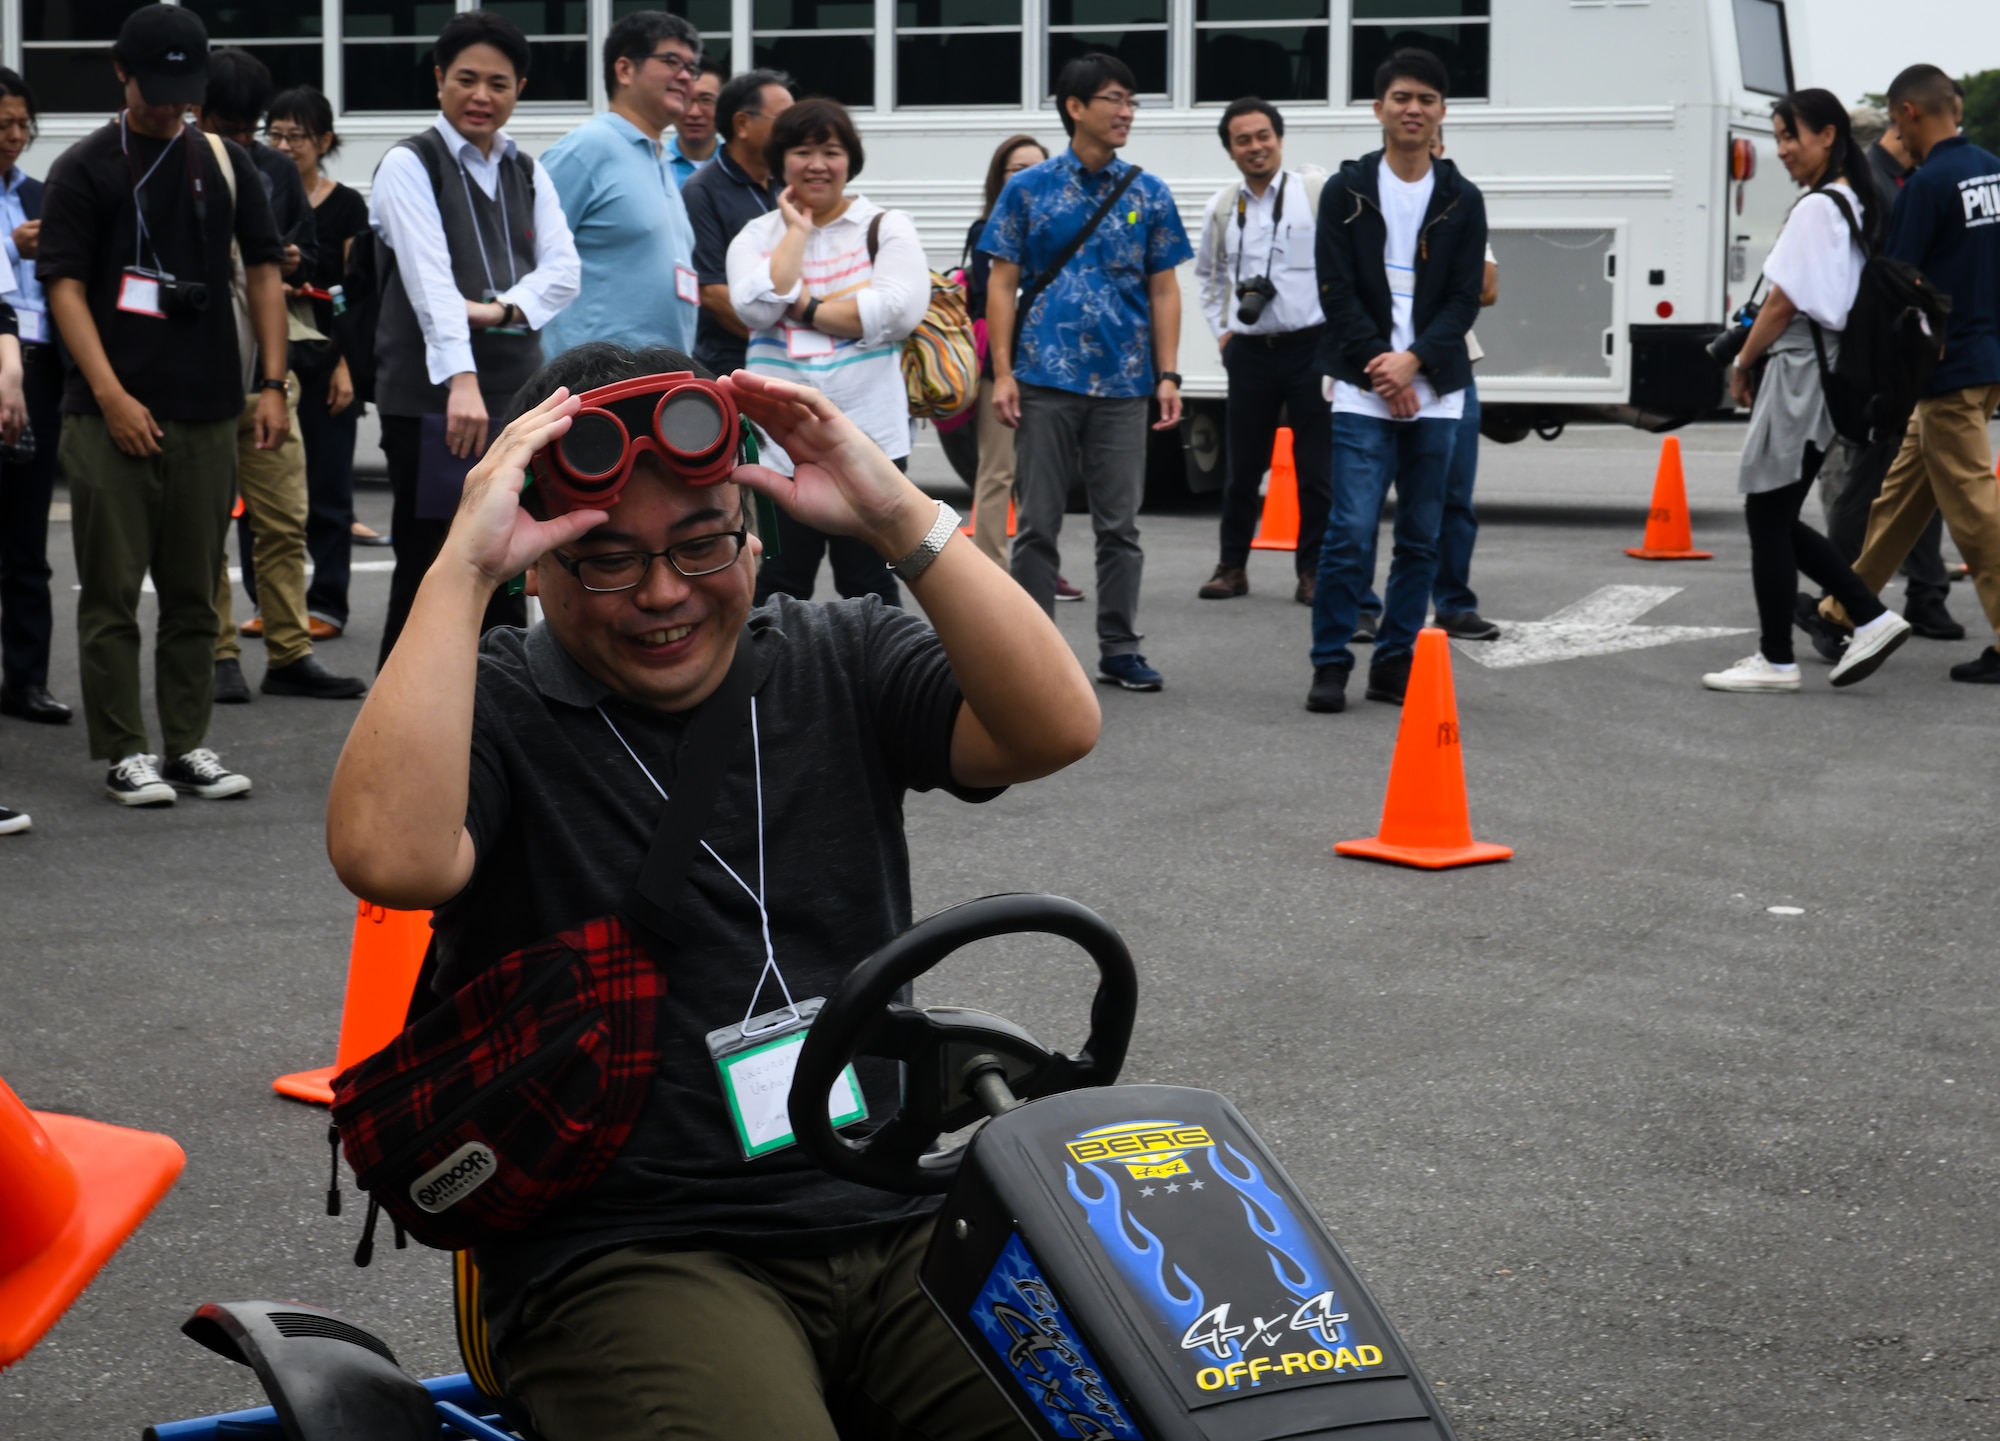 Kazunori Uehara, Twitter Tour visitor, drives a go-cart while wearing drunk goggles during a drunken driving prevention demonstration at Kadena Air Base, Japan, Nov. 4, 2019. Uehara was given drunk goggles to simulate driving under the influence of alcohol. Other demonstrations included using beer and mouthwash to show alcohol's effect on a breathalyzer. (U.S. Air Force photo by Staff Sgt. Benjamin Raughton)